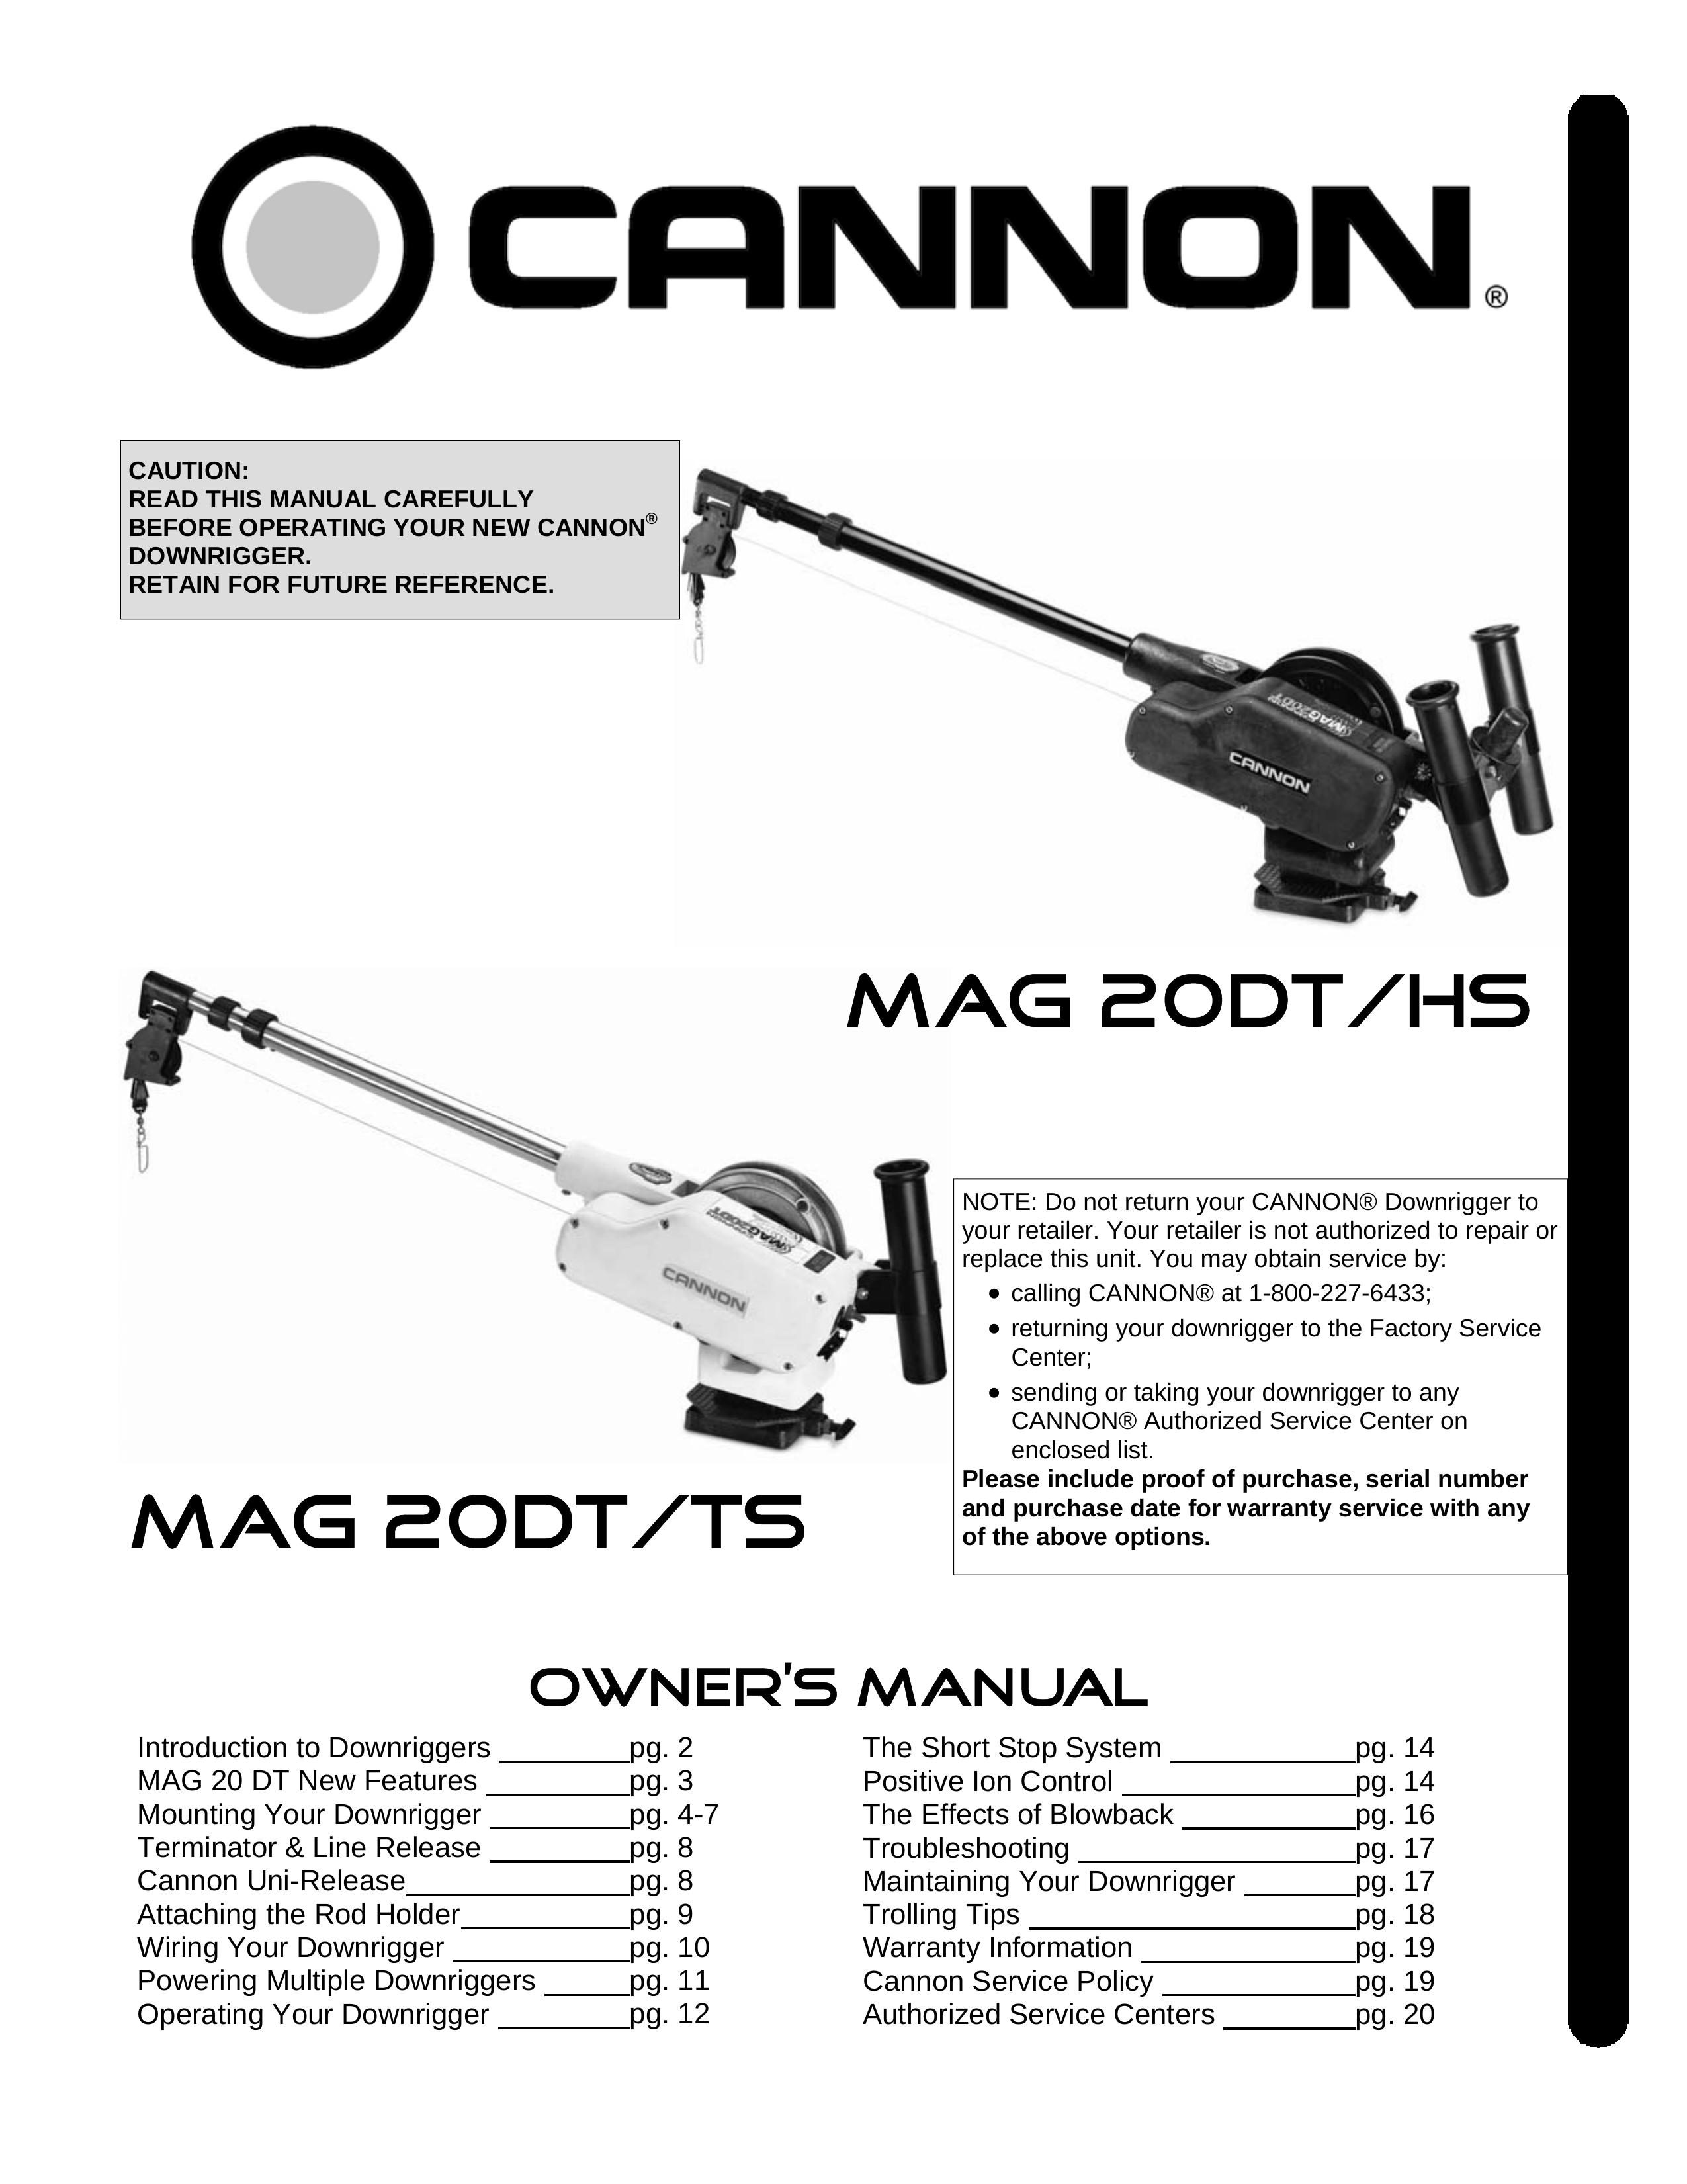 Cannon Mag 20 Dt/Ts Fish Finder User Manual